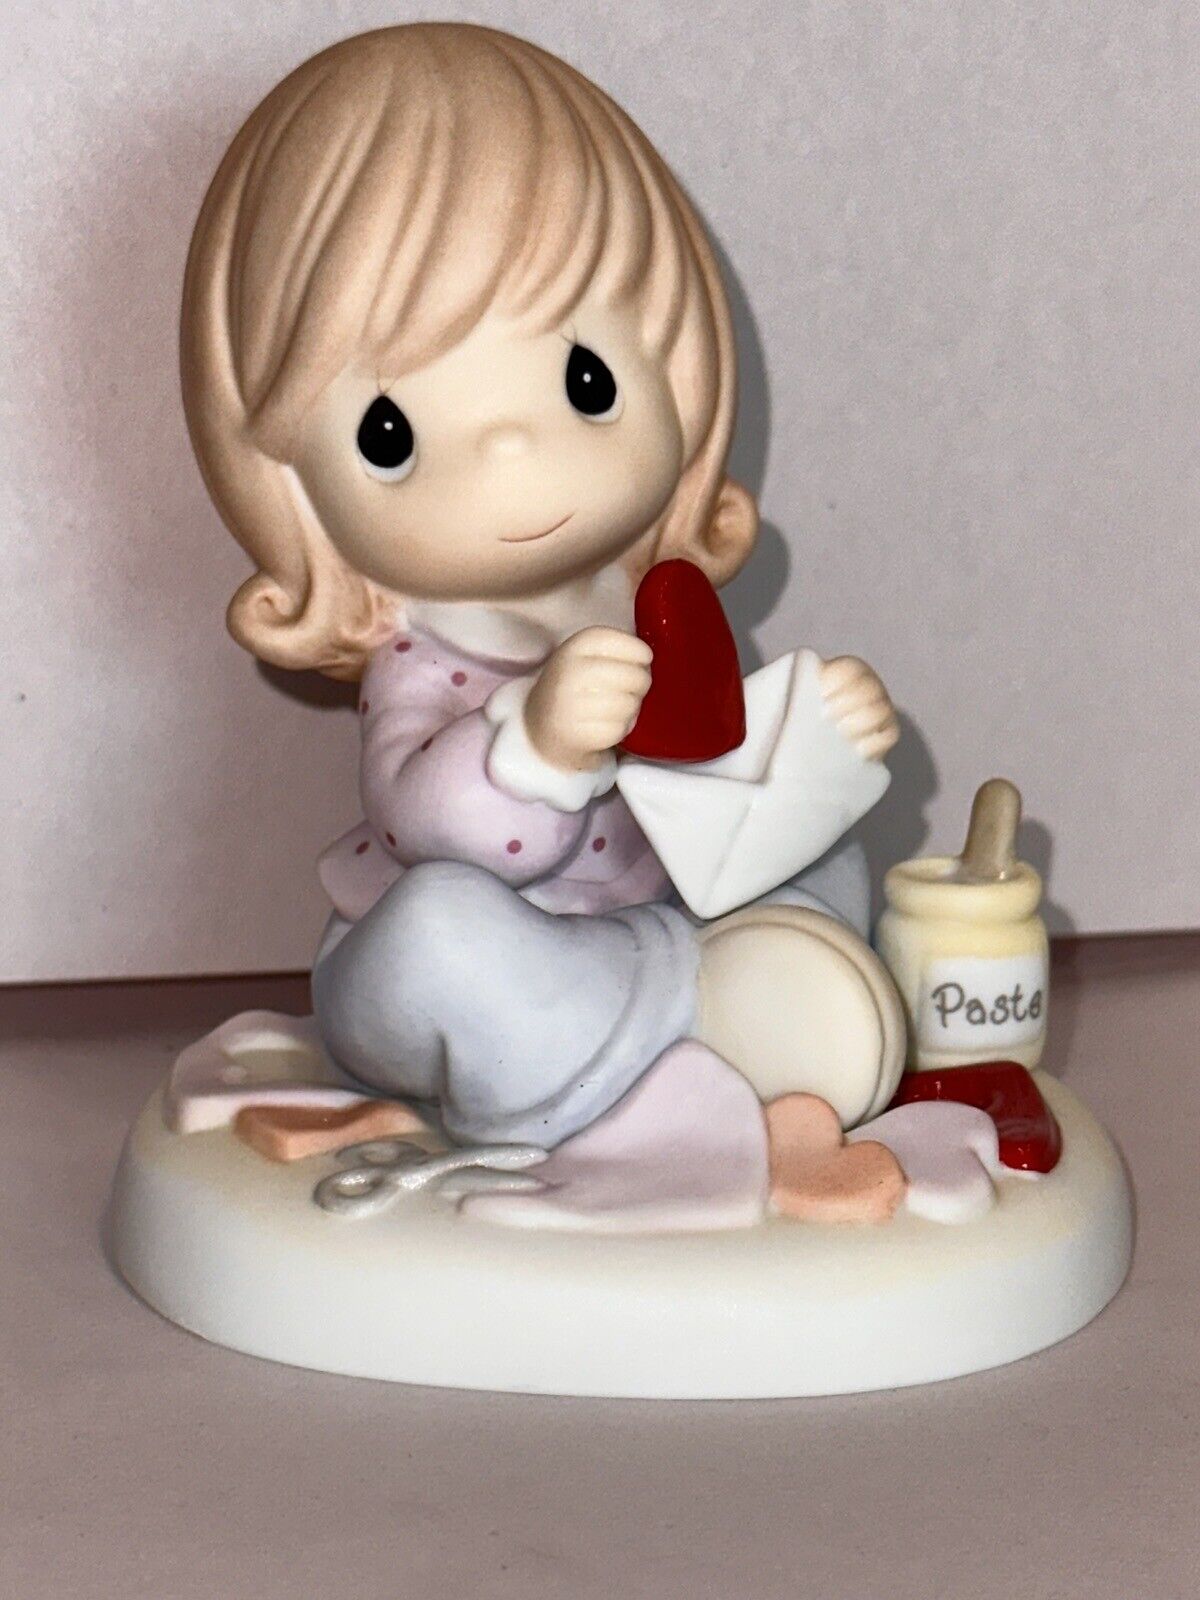 Precious Moments ‘Sending All My Love To You’ Bisque Porcelain Figurine